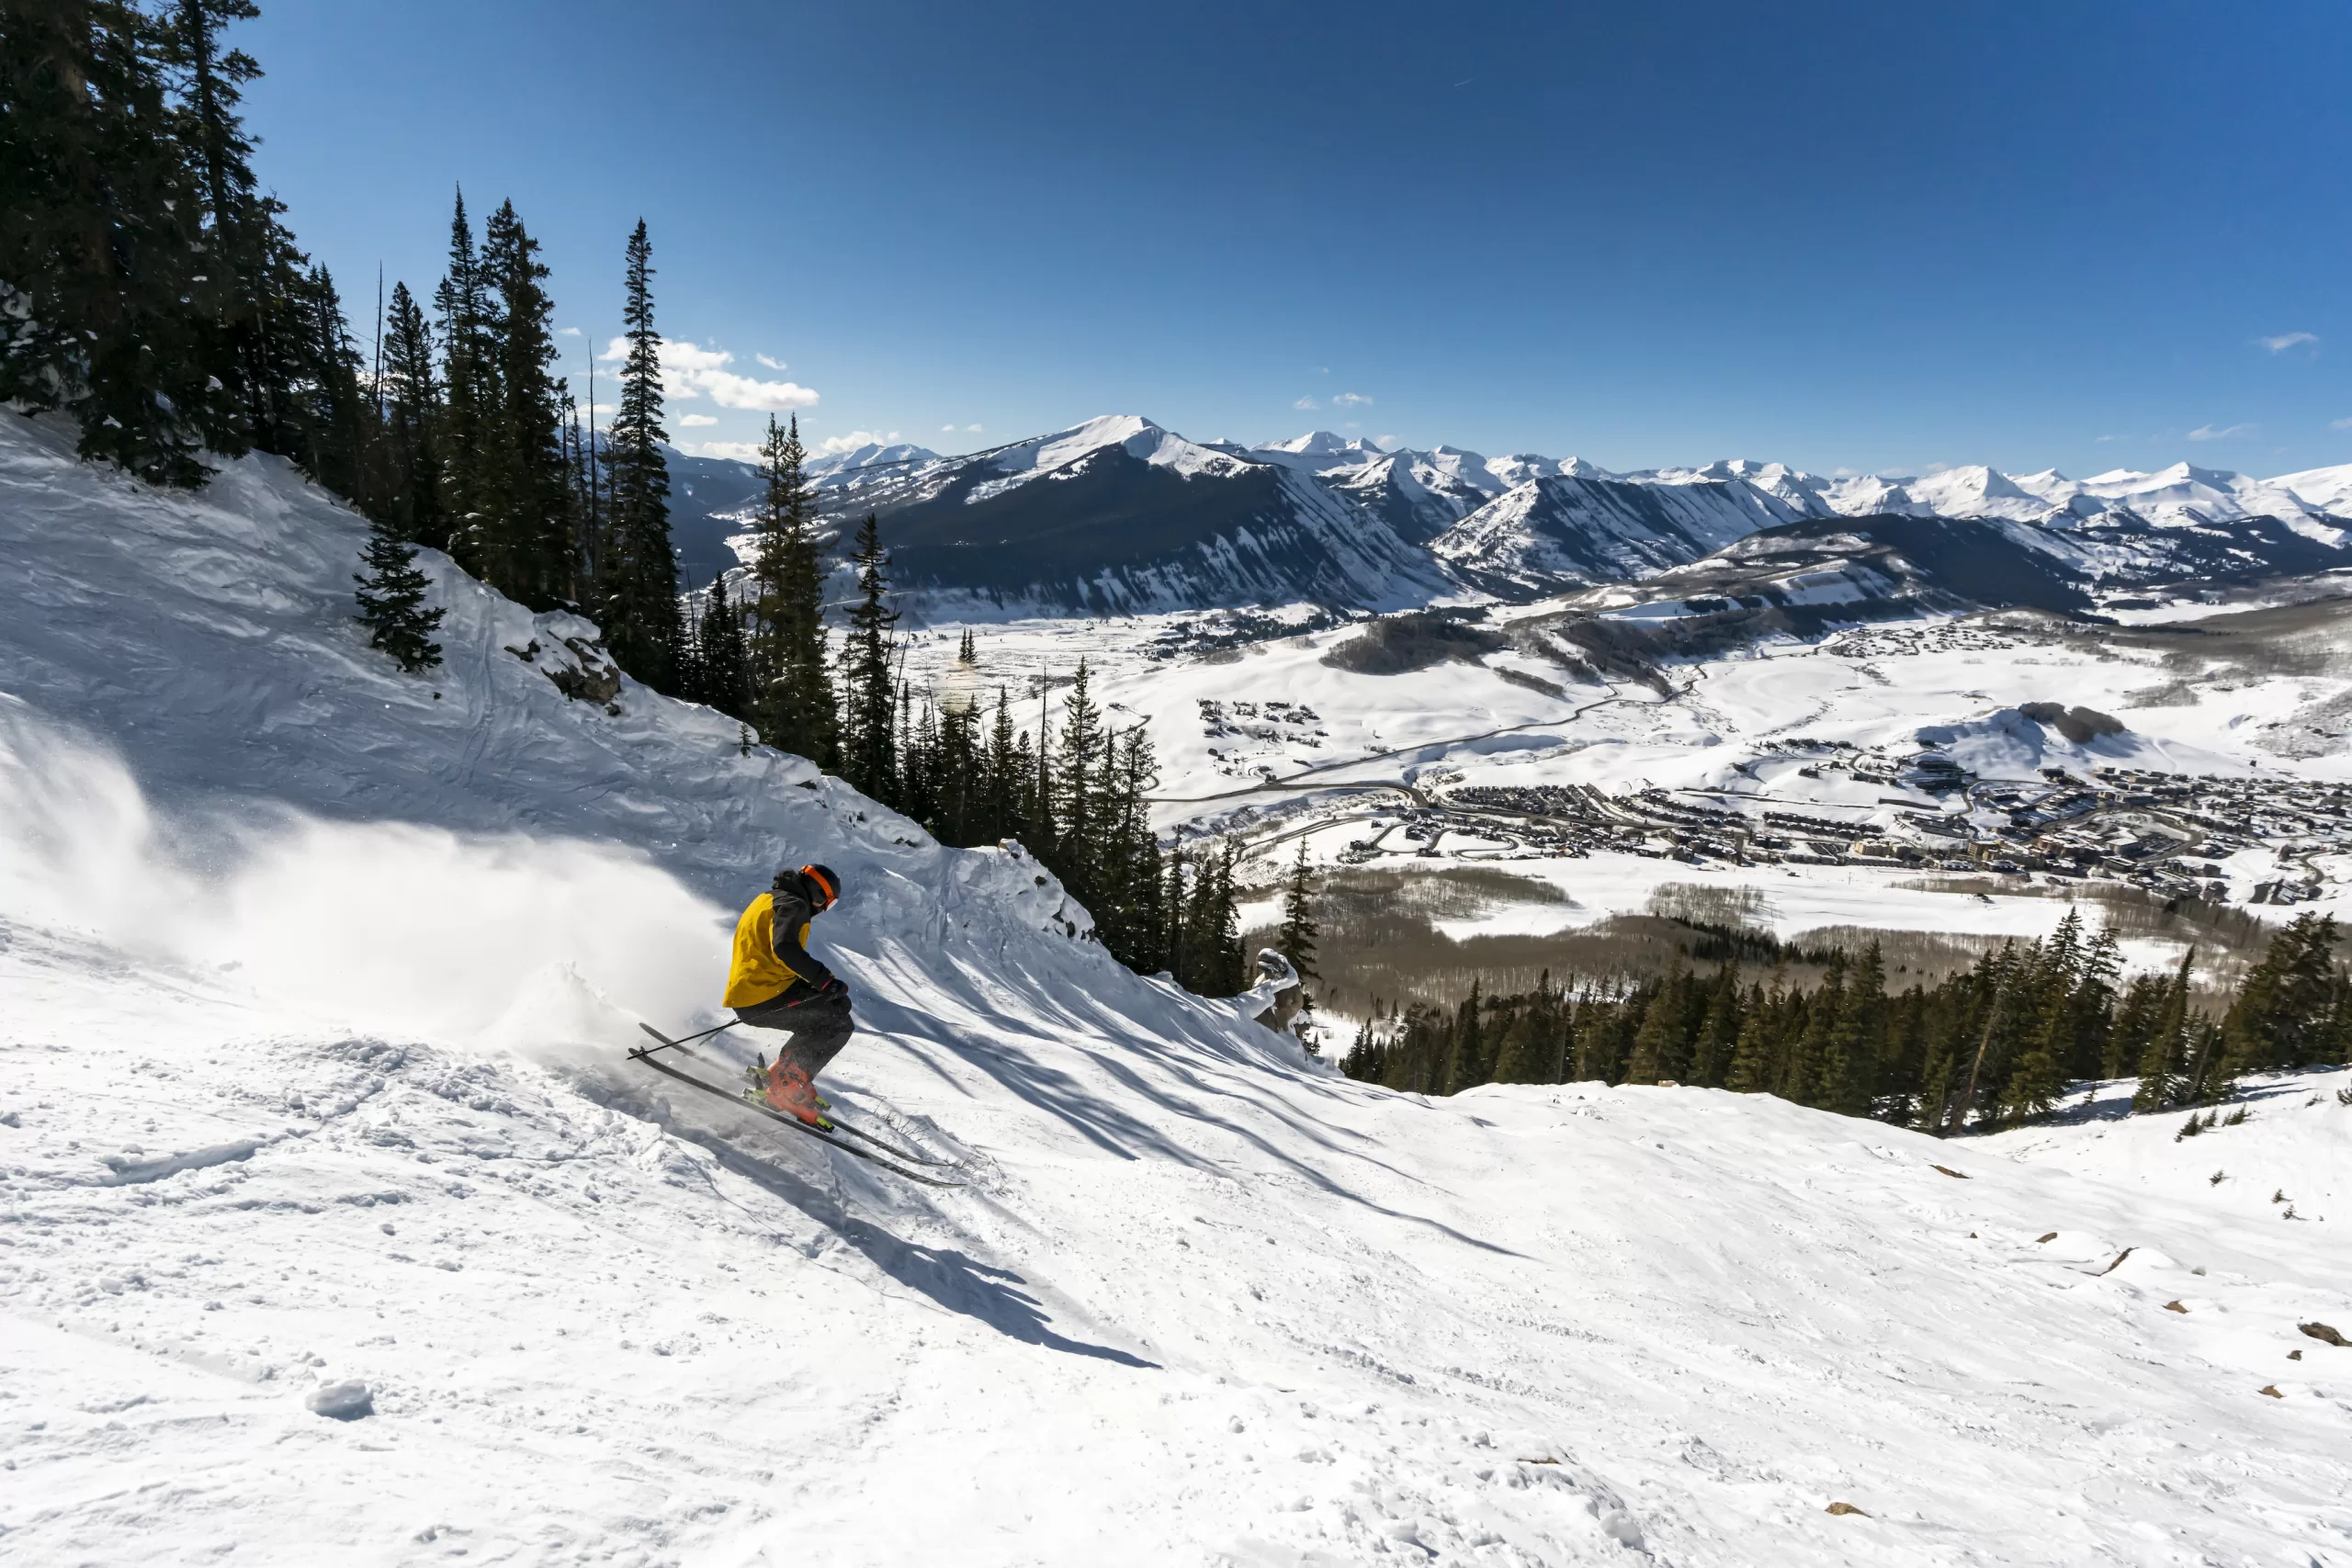 A skier on a steep slope with mountain peaks in the background